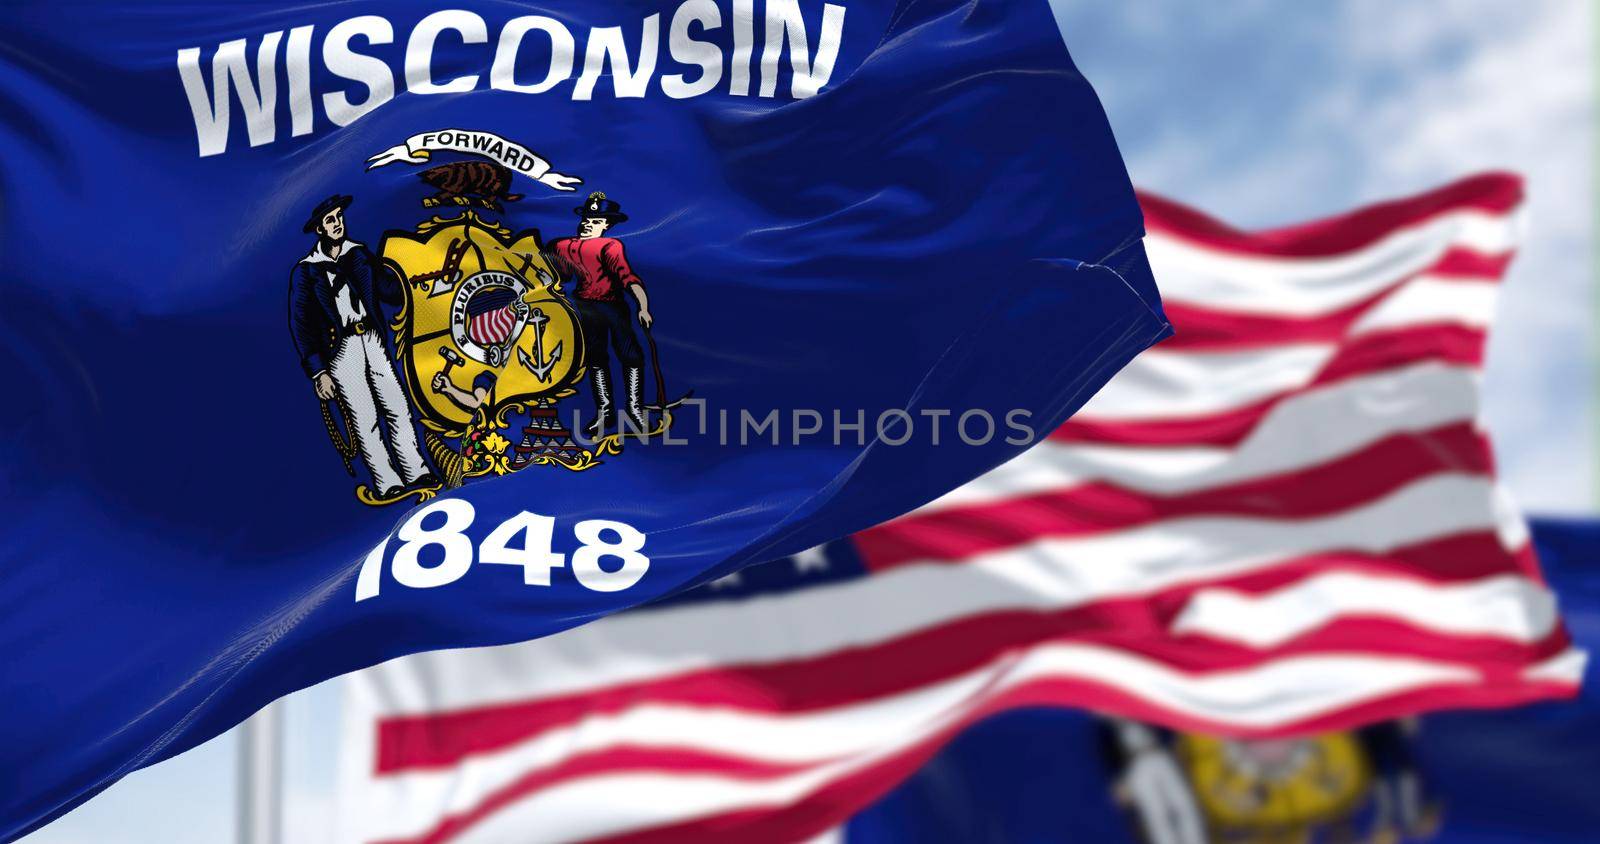 The Wisconsin state flag waving along with the national flag of the US by rarrarorro